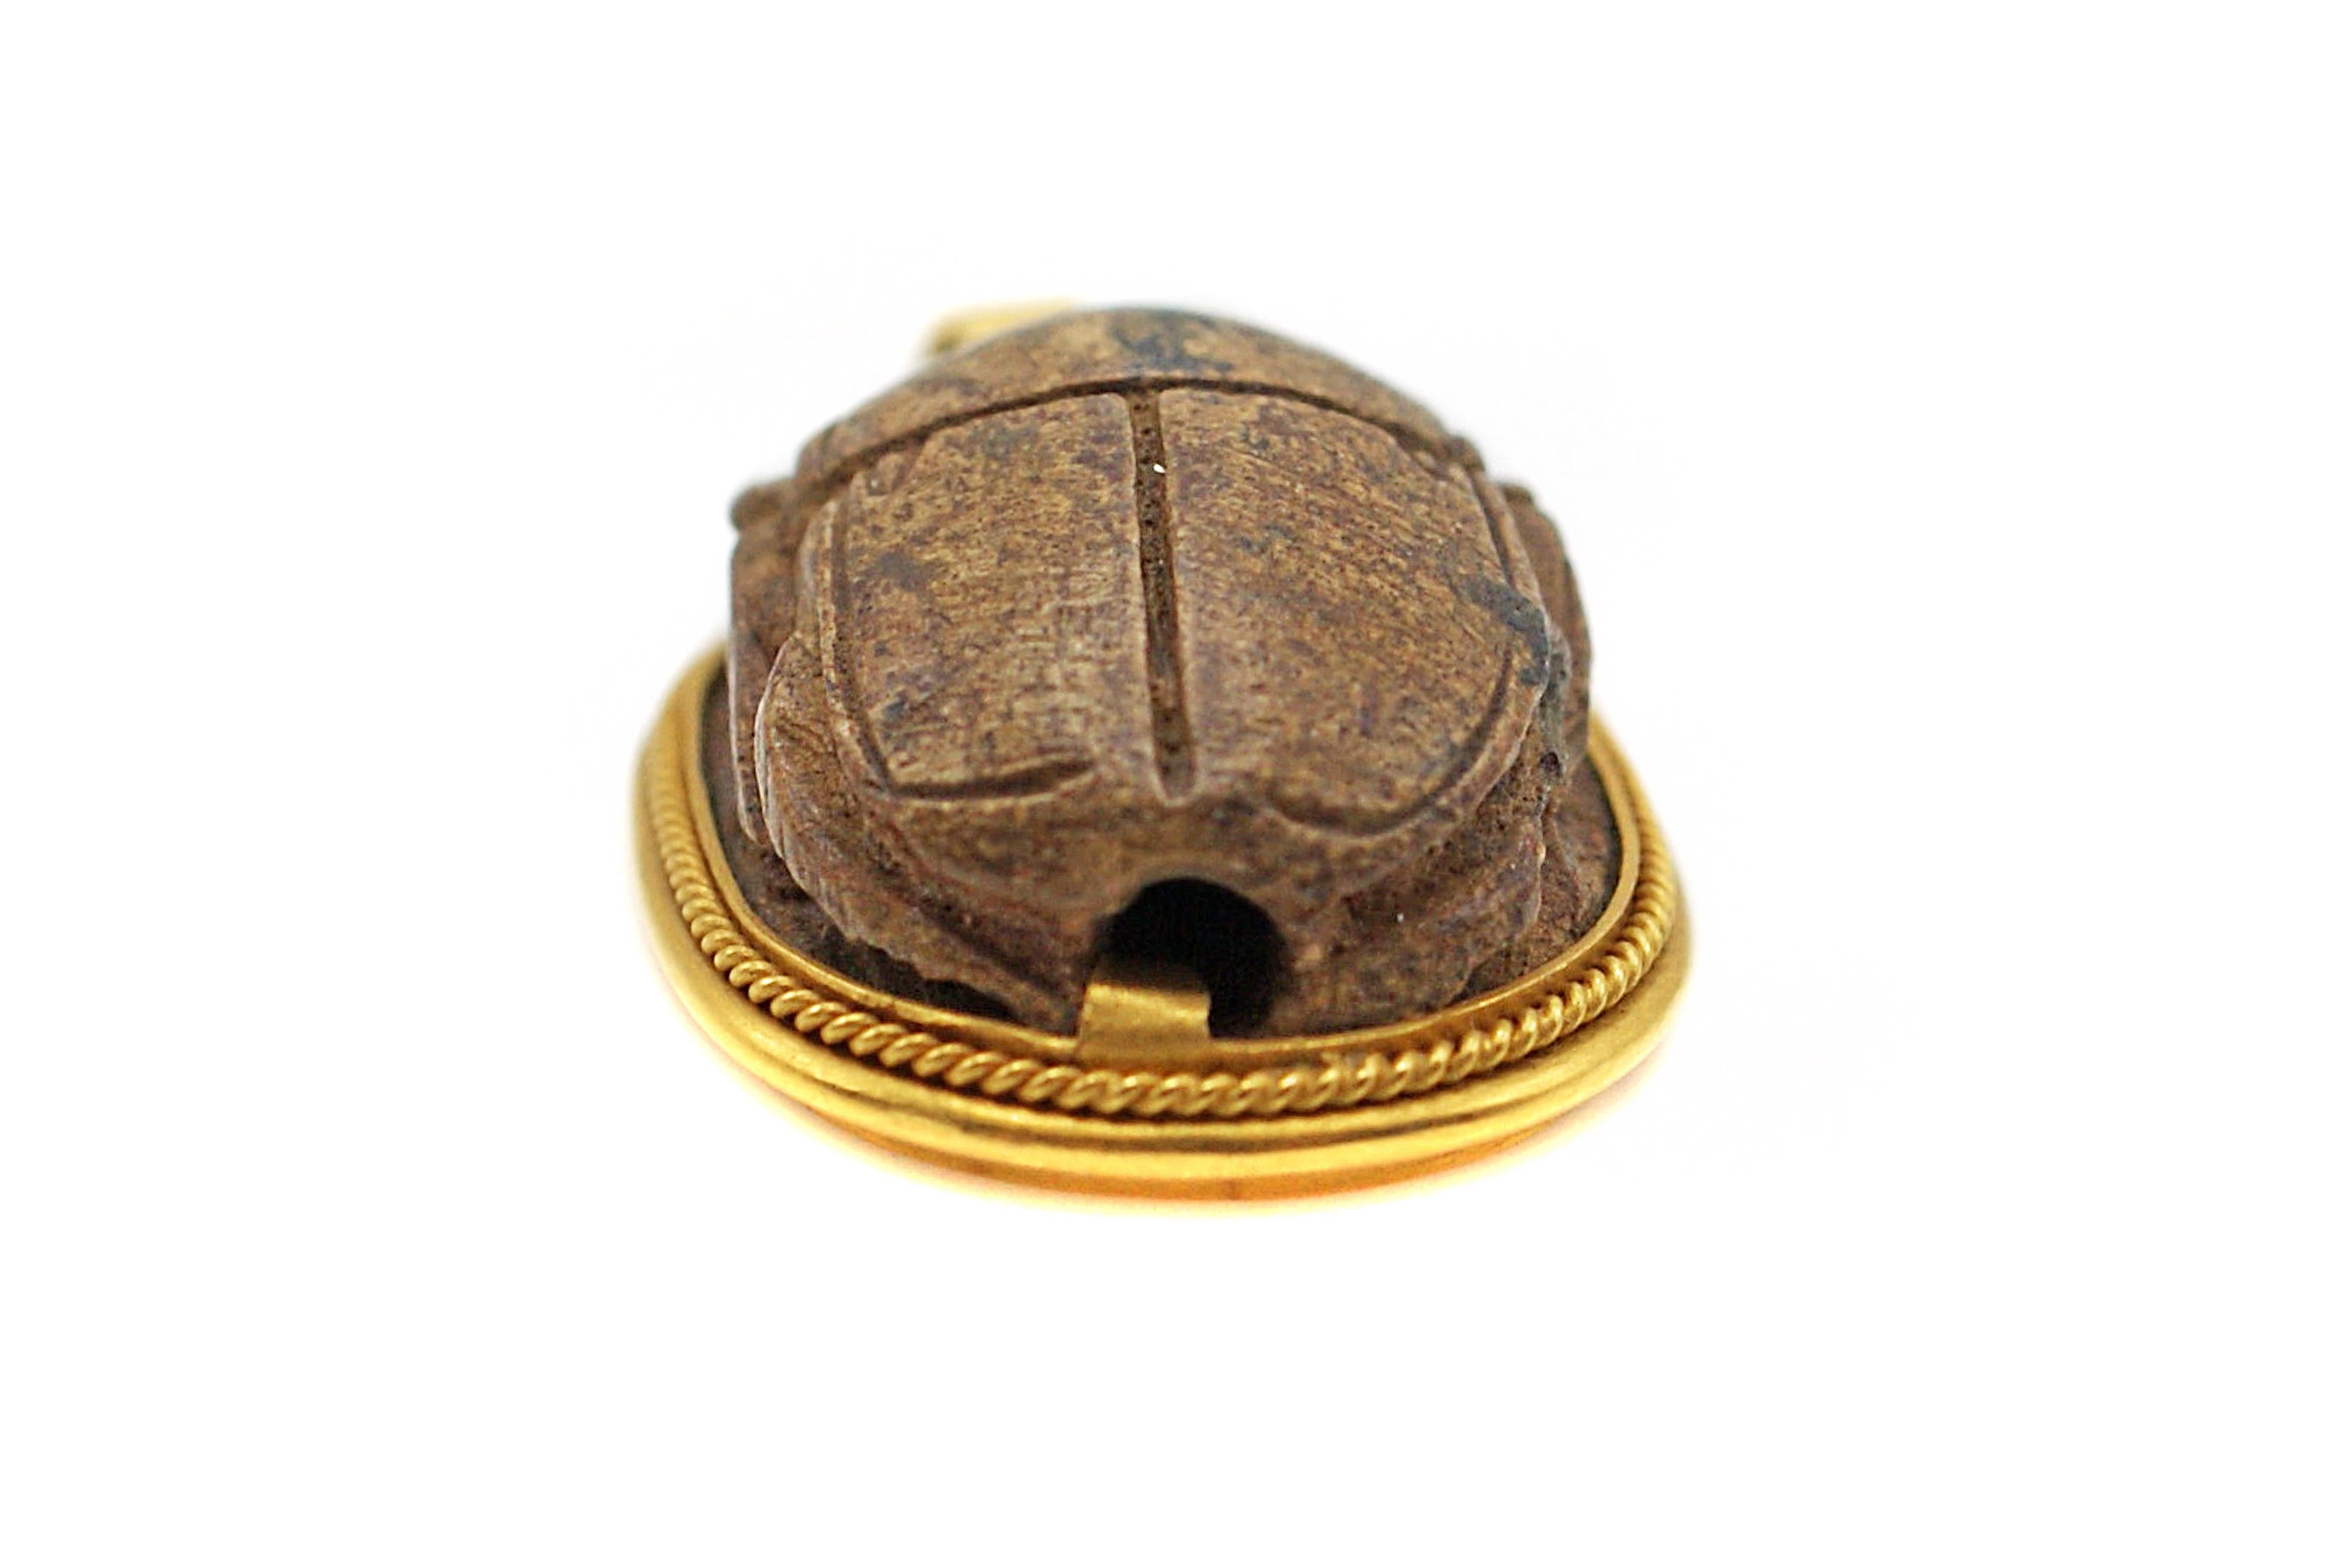 A beautiful antique wood carving depicting a scarab in the front and ancient symbols in the back, was inspired by the Egyptian Revival Period when new excavations were made in Egypt in the 19th century. The findings which were made public all over